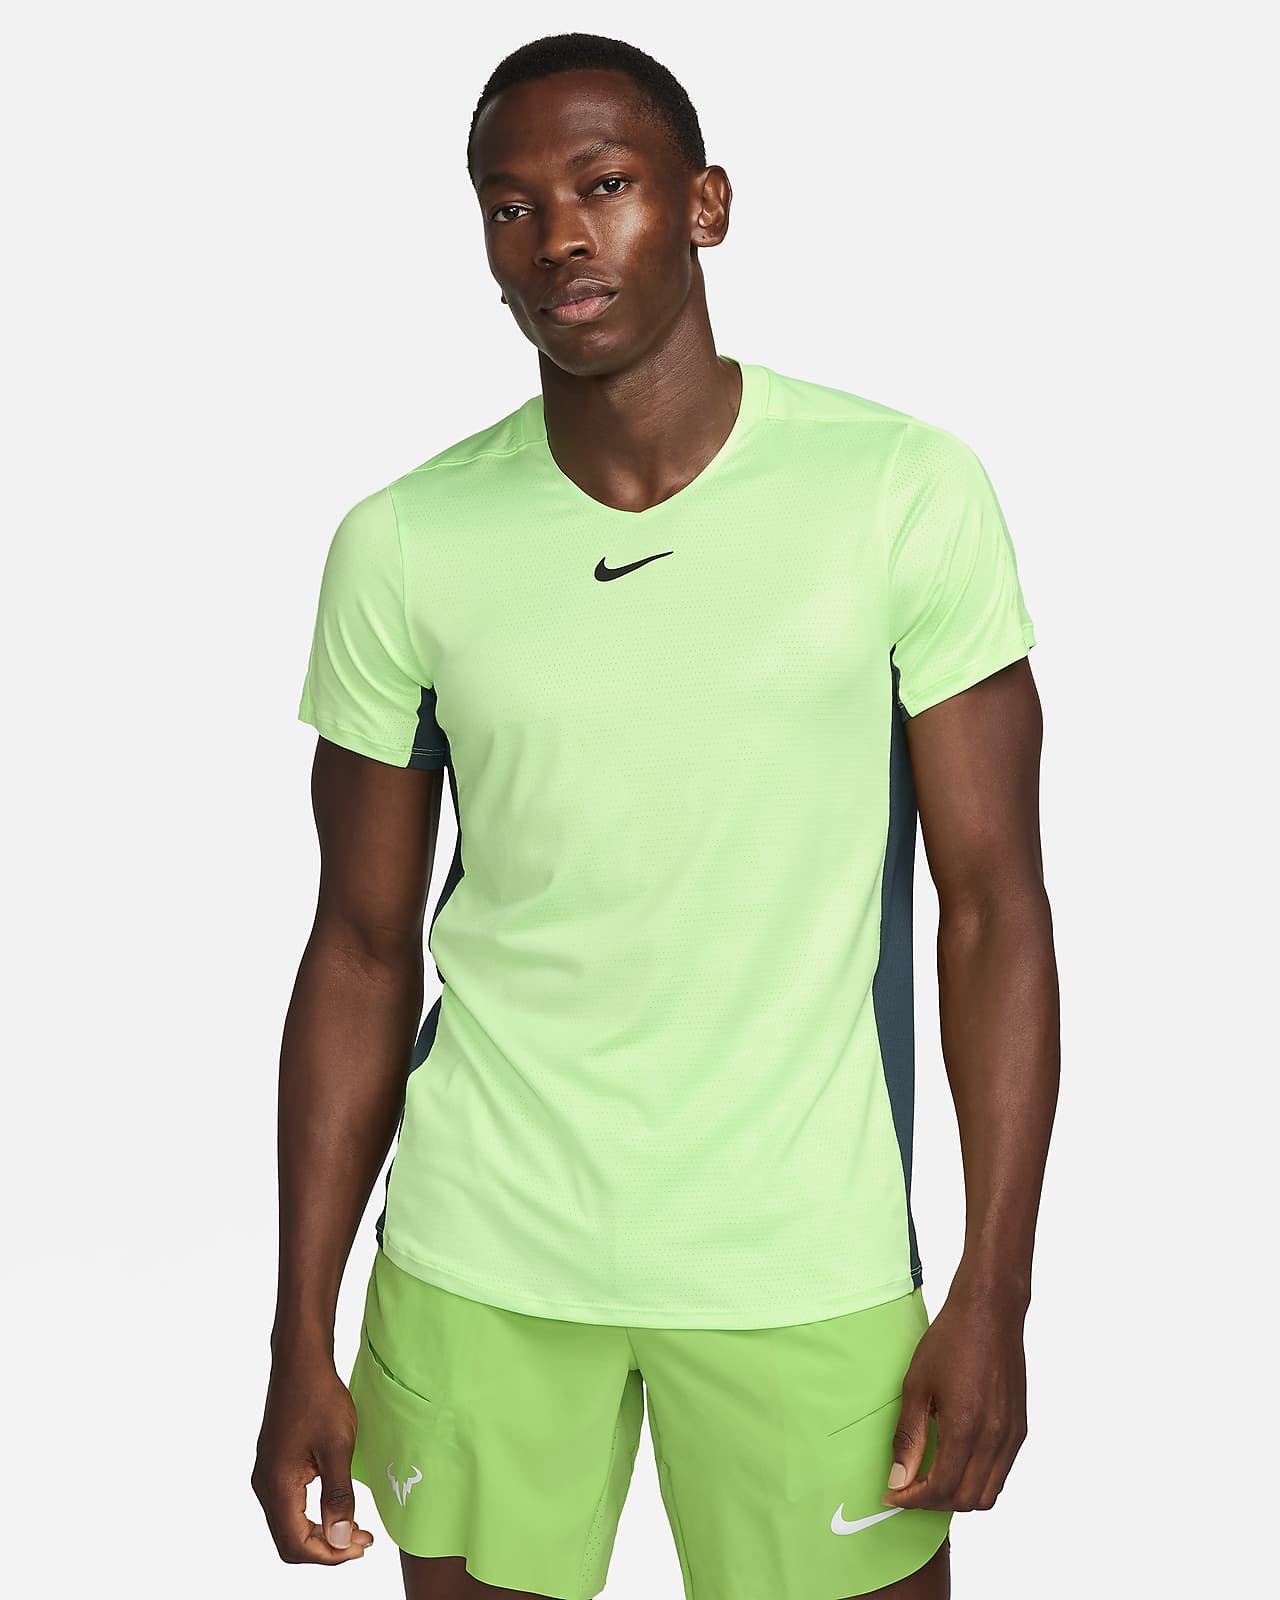 https://static.nike.com/a/images/t_PDP_1280_v1/f_auto,q_auto:eco/0b5ed4f7-2161-4d82-a191-3d67b108c71d/nikecourt-dri-fit-advantage-tennis-top-dtCDbD.png